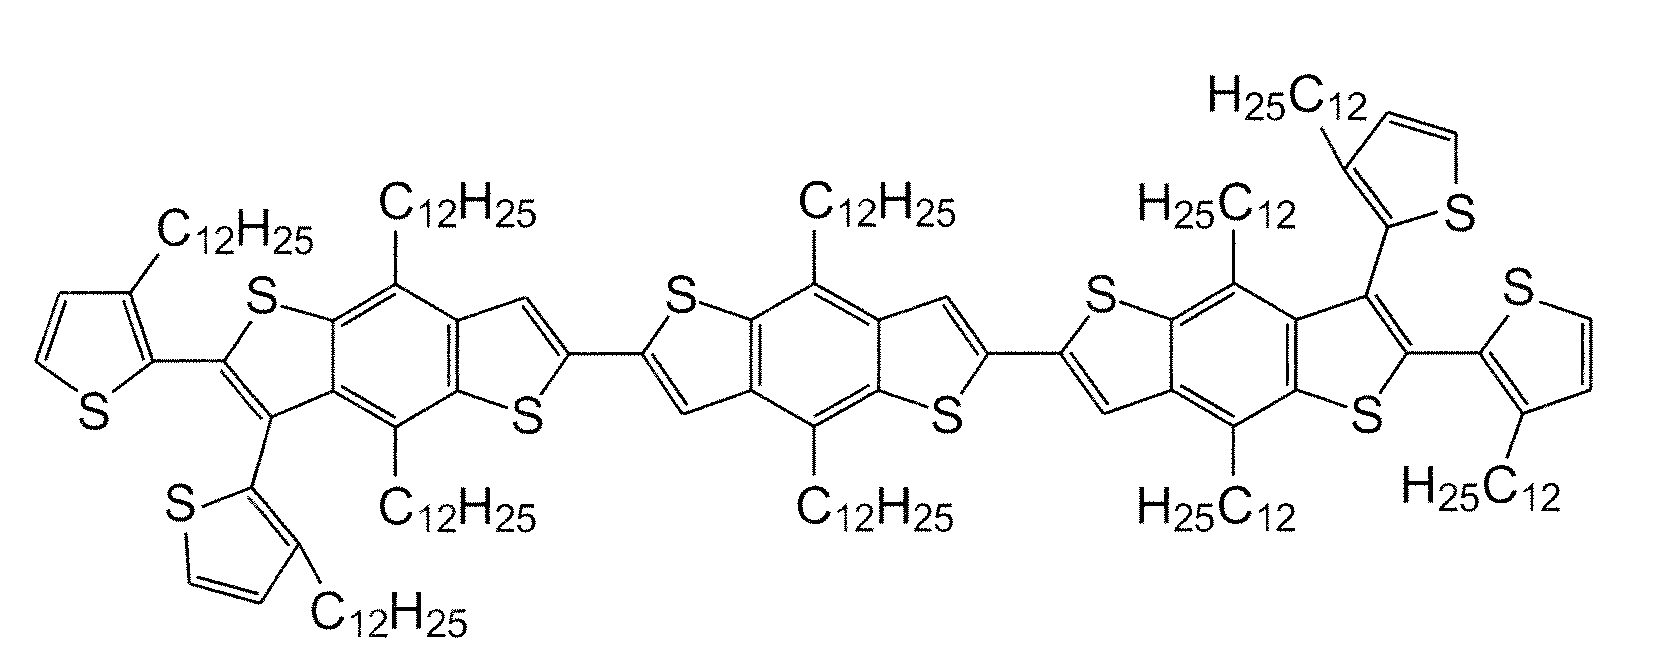 Purification process for semiconducting monomers